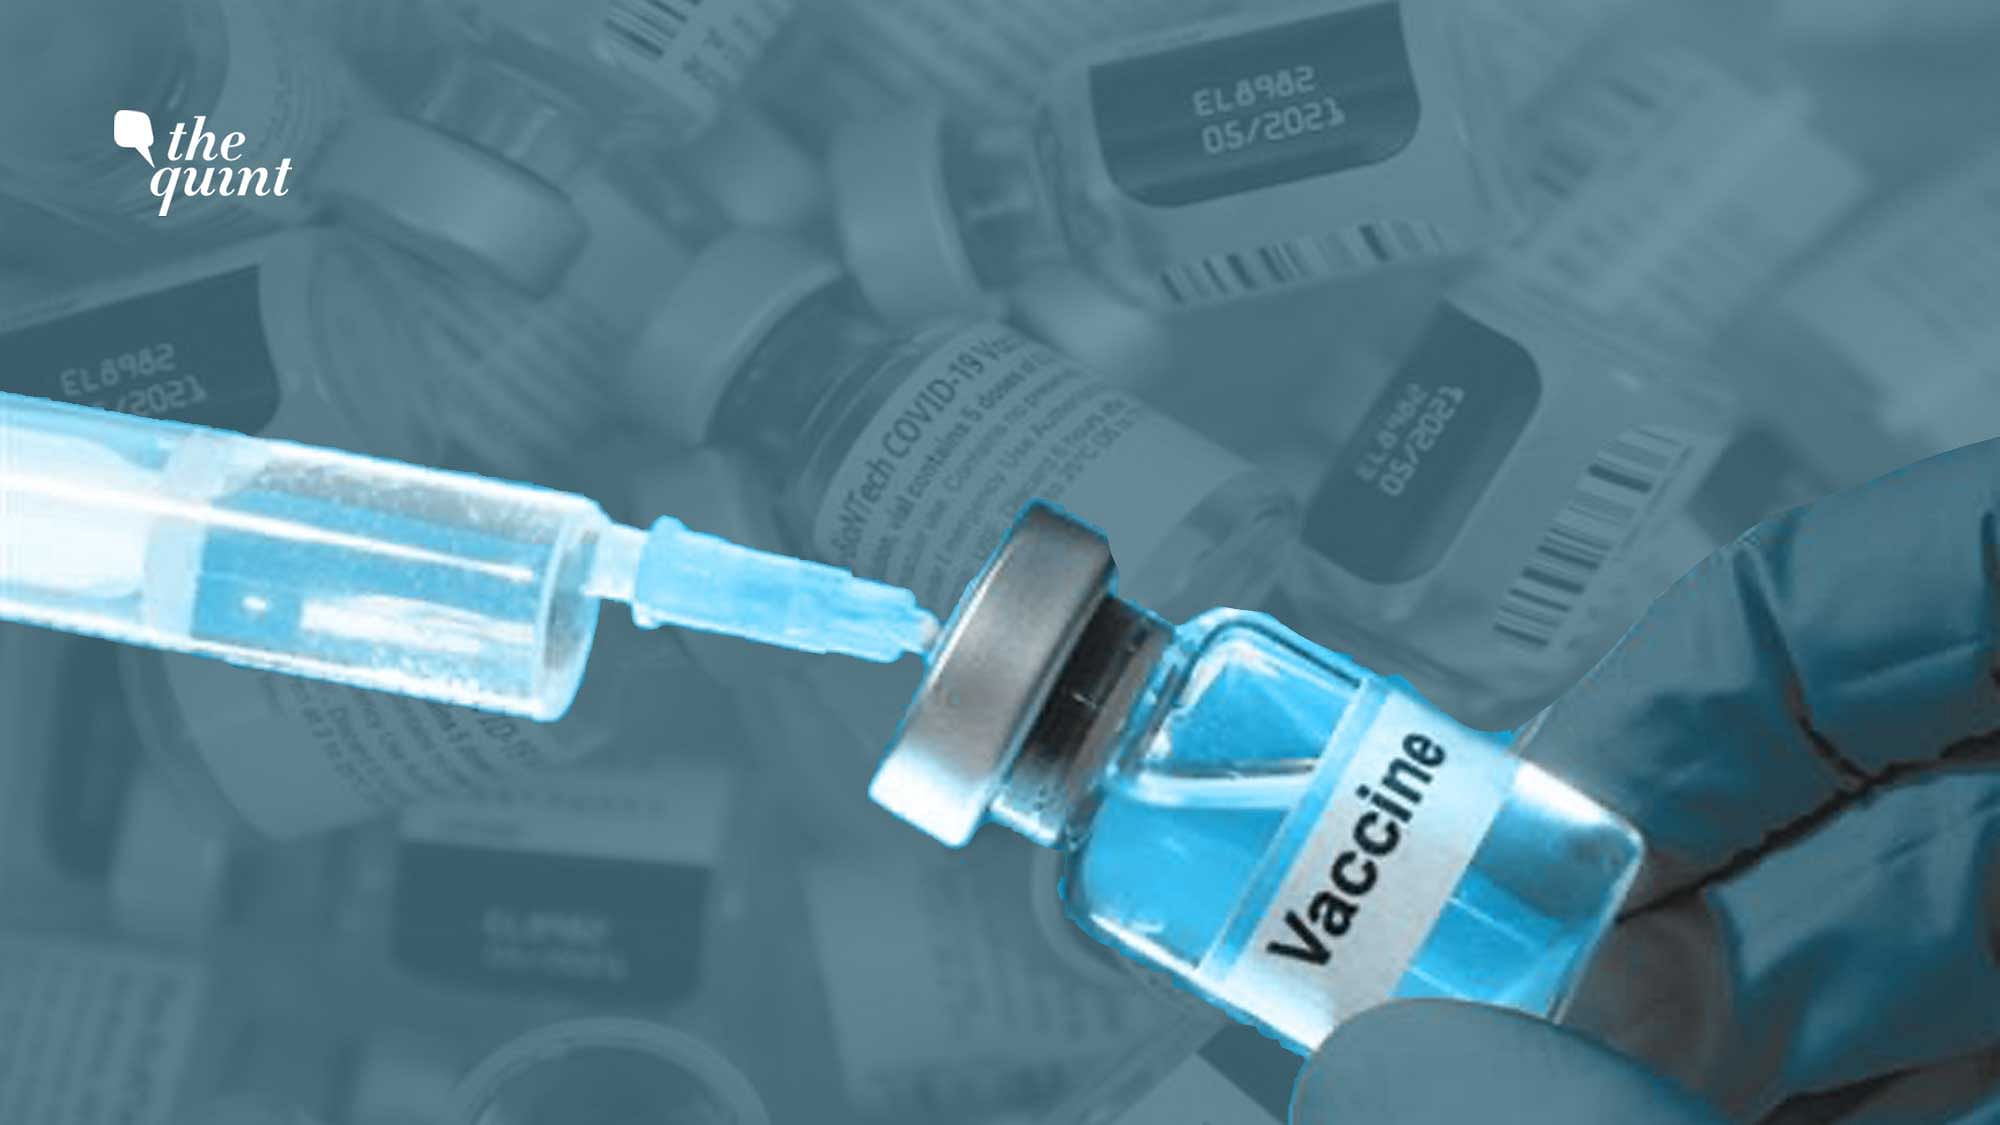 What exactly causes vaccine wastage and how can it be reduced?